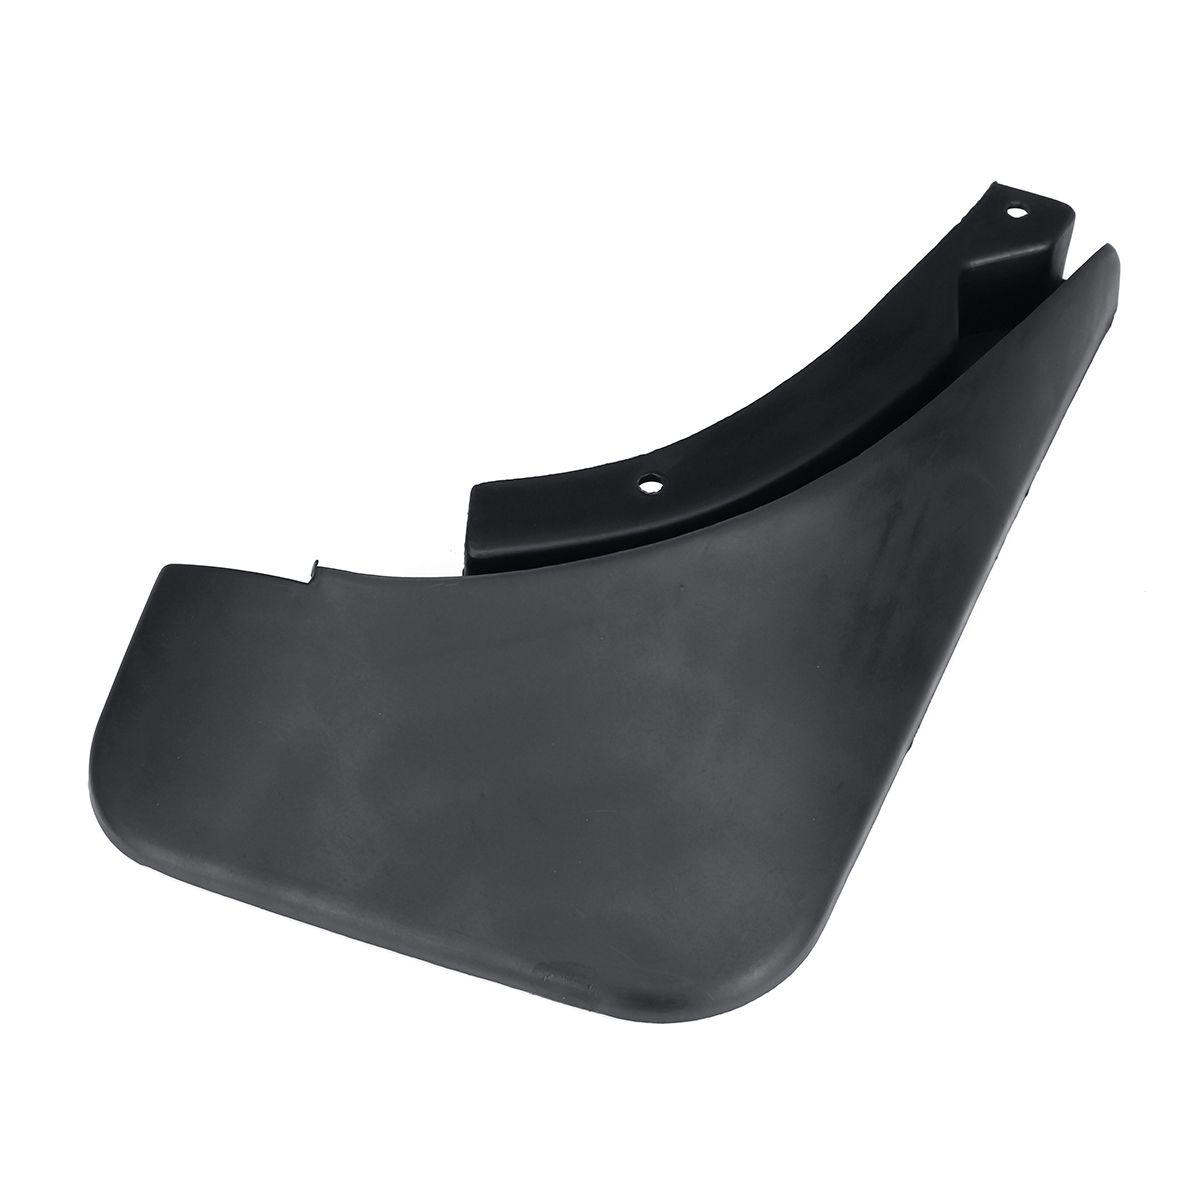 Front-And-Rear-Mud-Flaps-Car-Mudguards-For-VW-Jetta-2006-2011-1406566